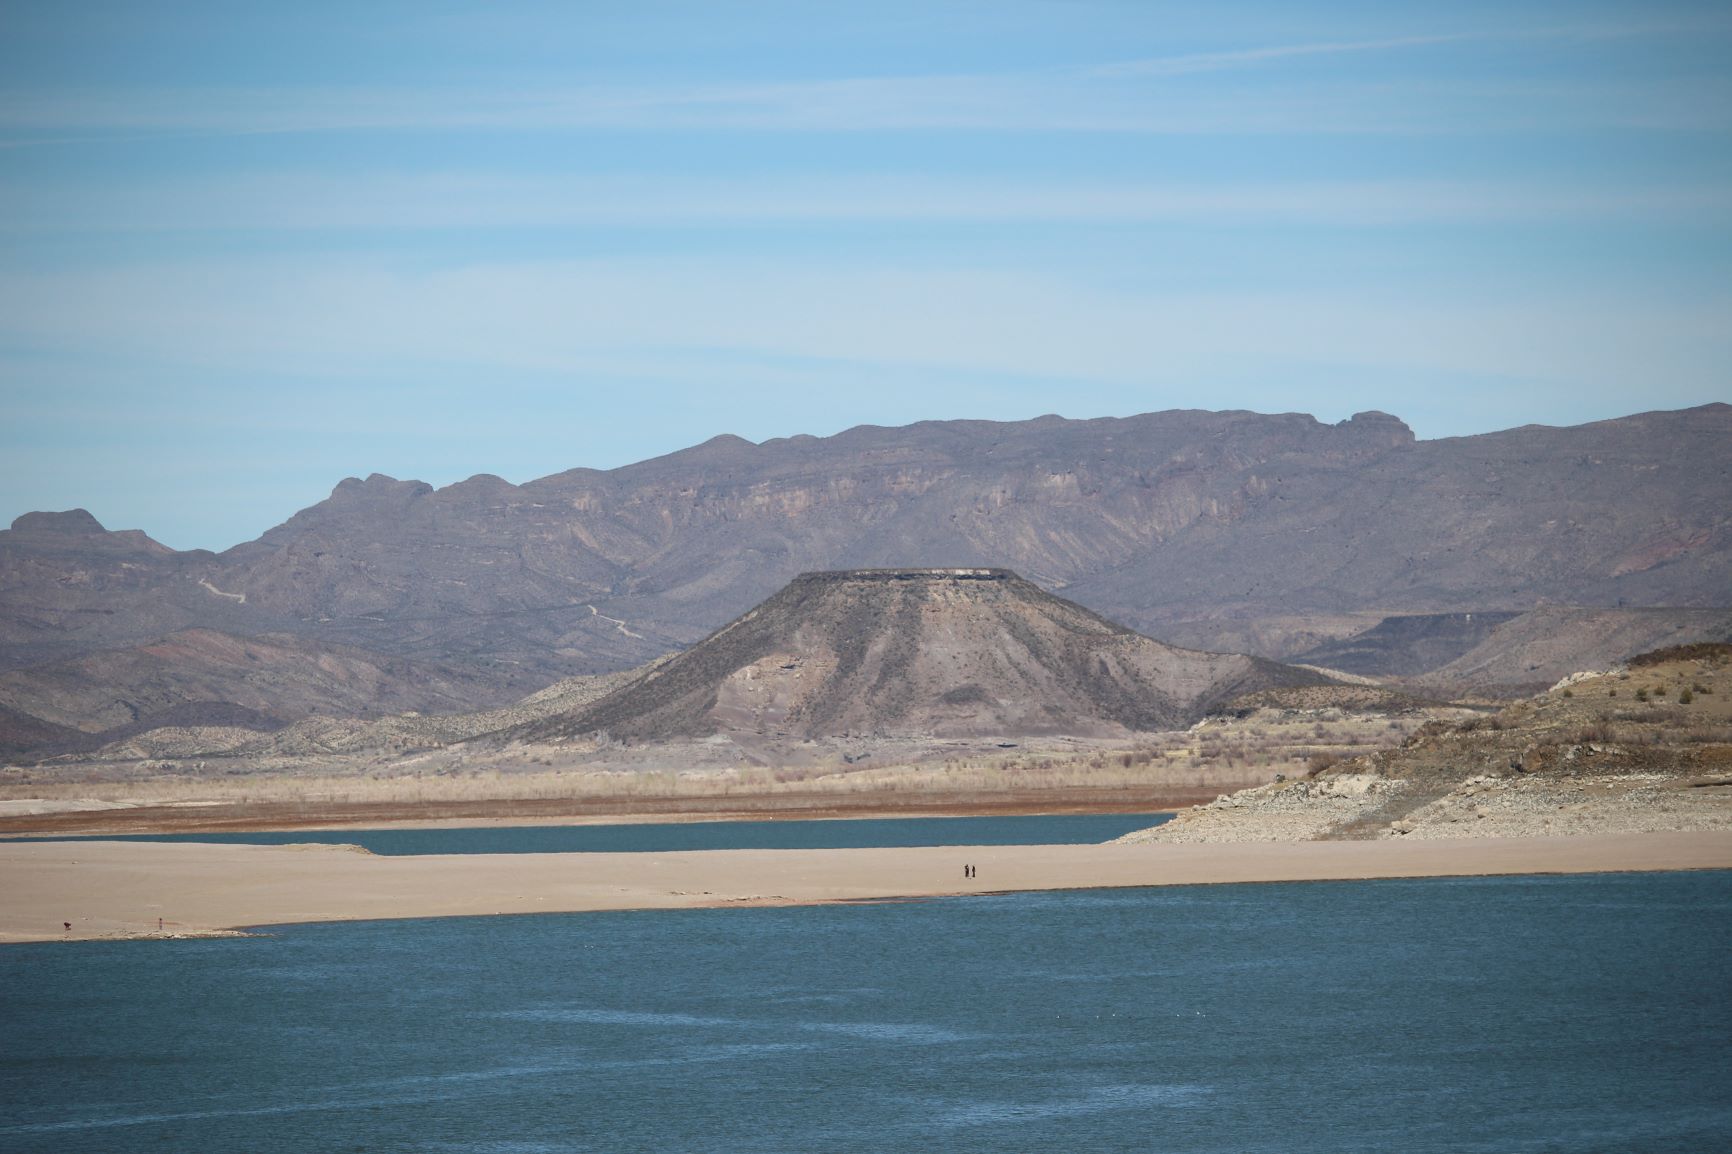 As water levels drop in Elephant Butte, Reclamation prepares for conditions not seen since the 1950s